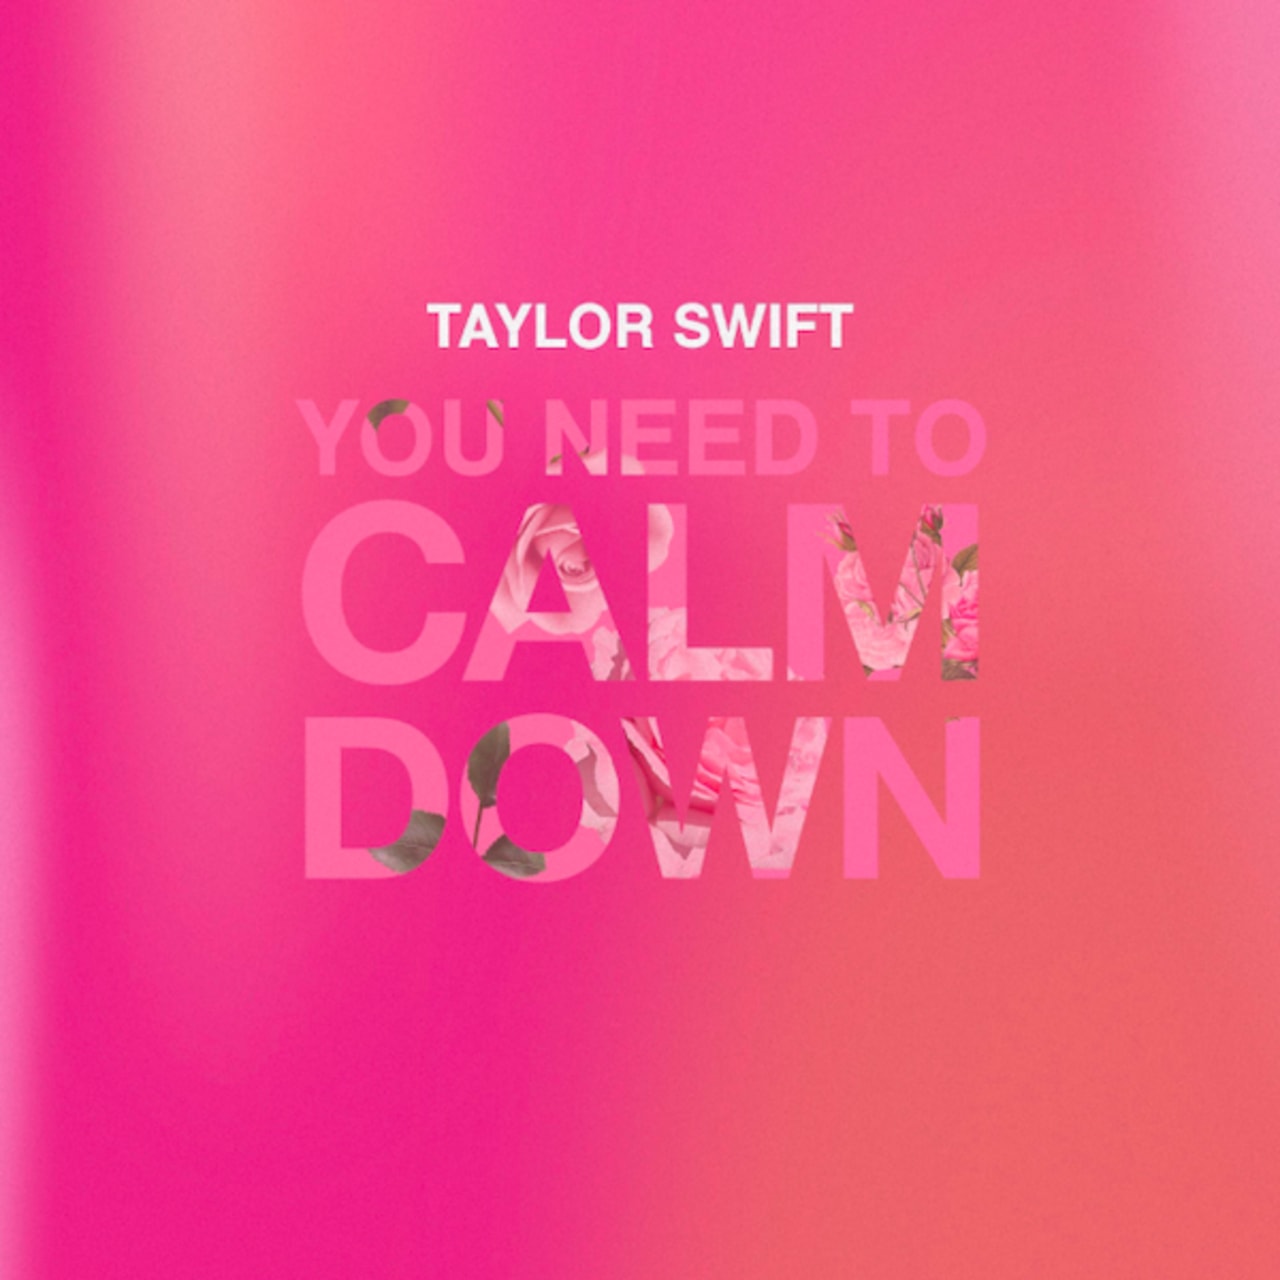 Taylor Swift Shares New Song And Video You Need To Calm Down Off Upcoming Album Lover